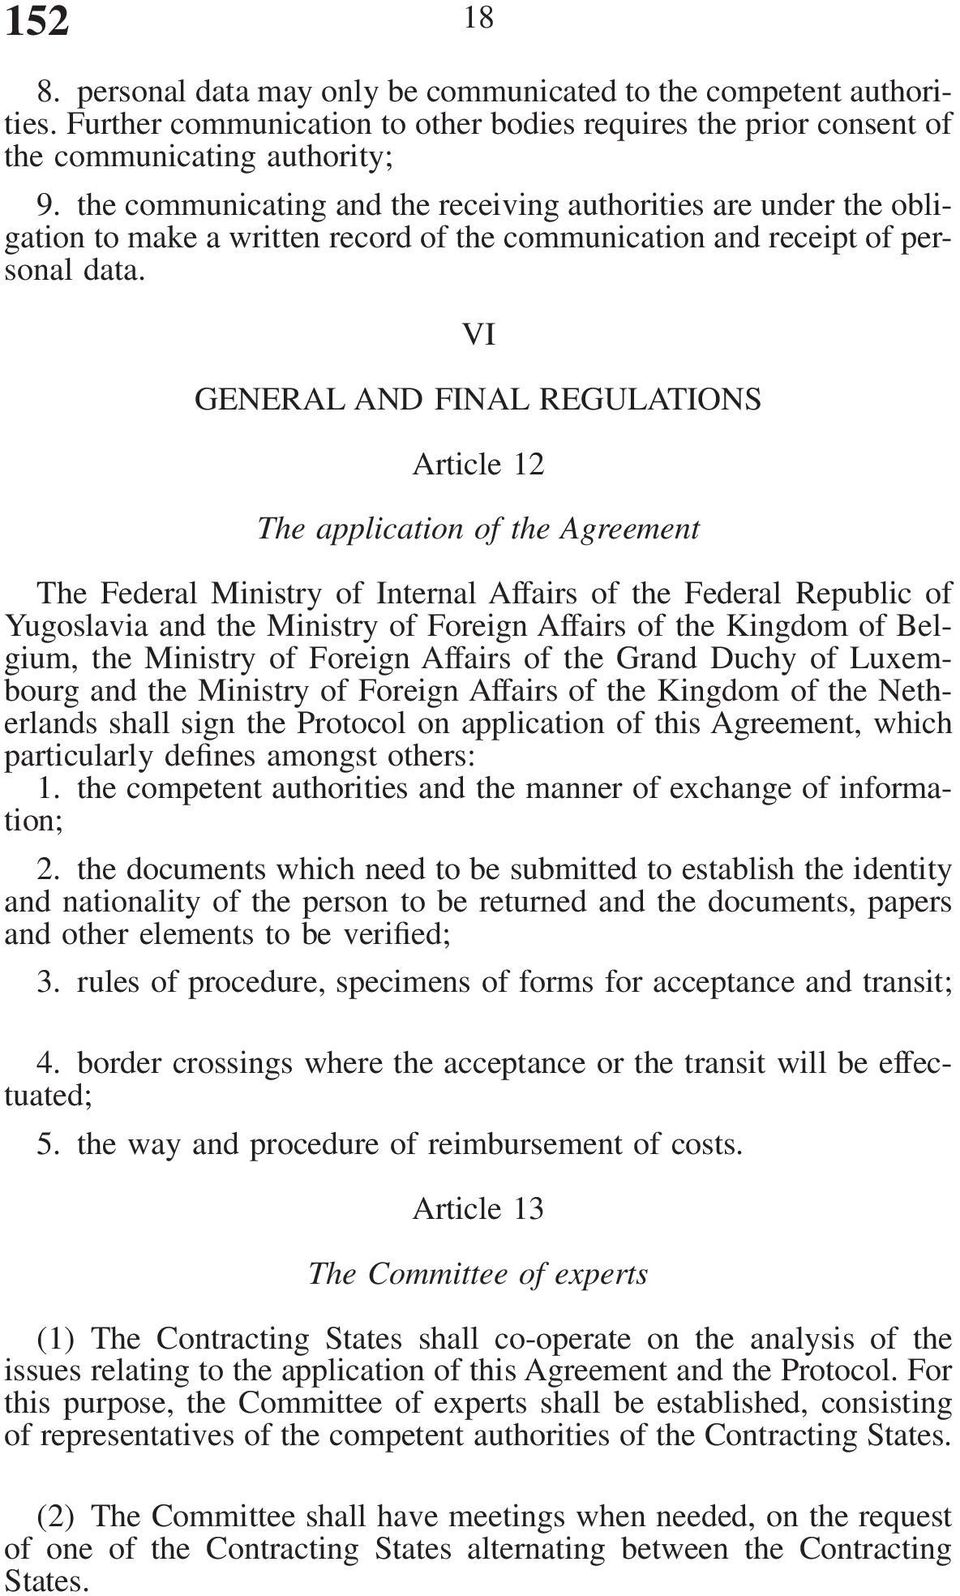 VI GENERAL AND FINAL REGULATIONS Article 12 The application of the Agreement The Federal Ministry of Internal Affairs of the Federal Republic of Yugoslavia and the Ministry of Foreign Affairs of the